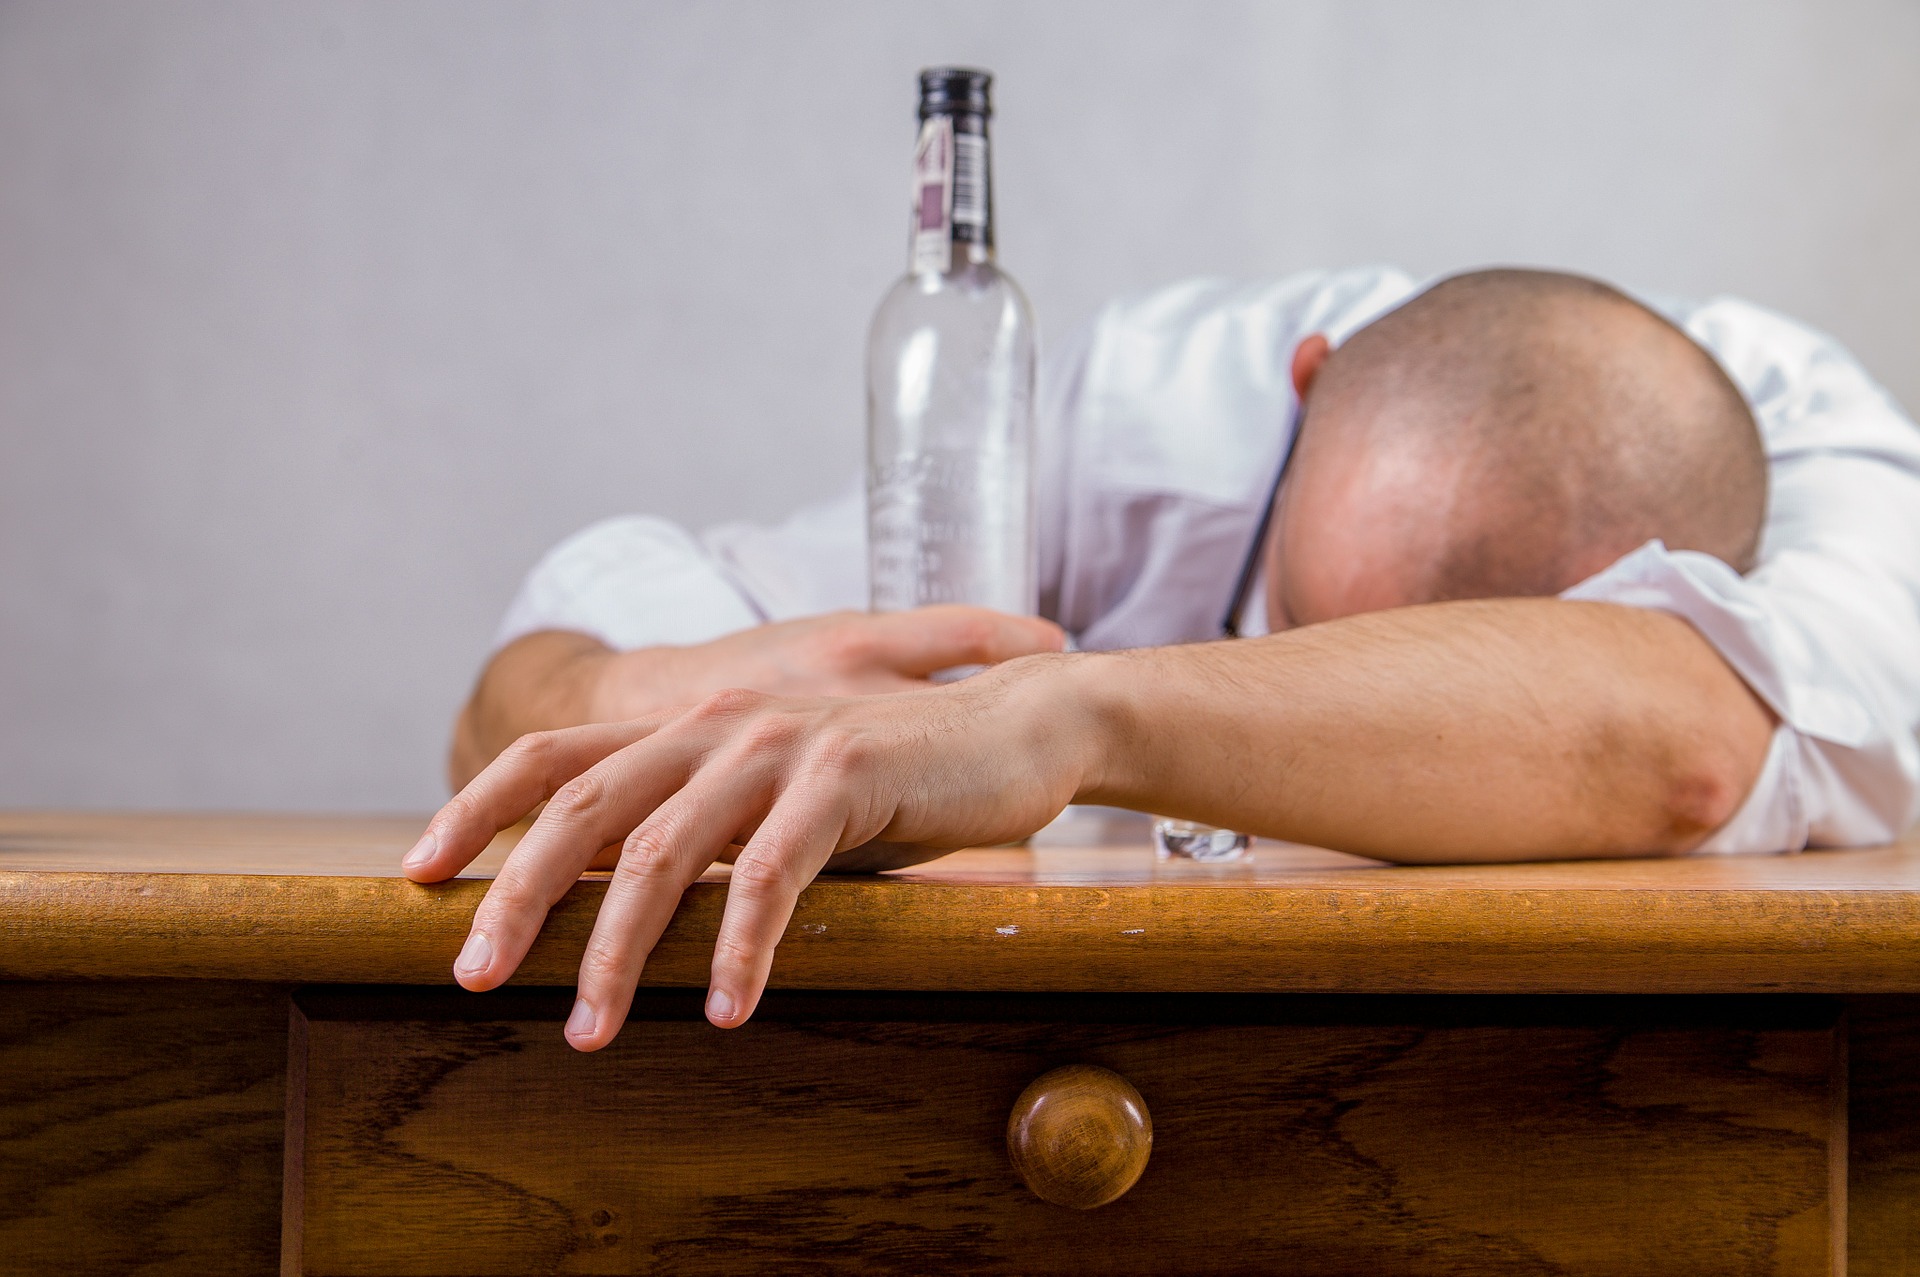 A man slumped over a bar, one hand holding an empty bottle.